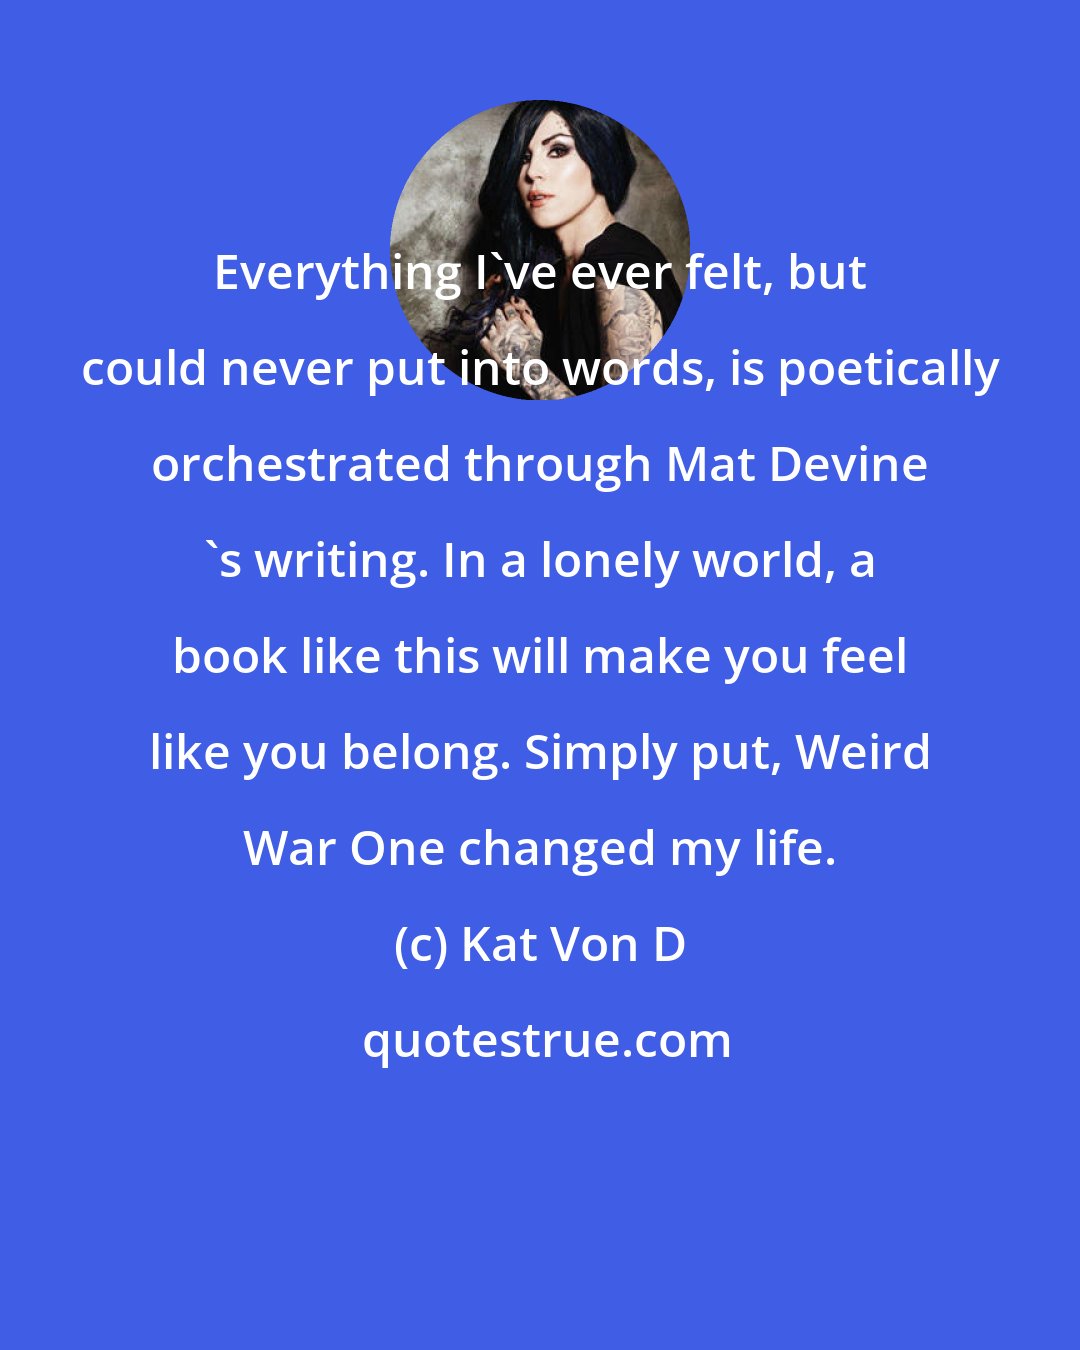 Kat Von D: Everything I've ever felt, but could never put into words, is poetically orchestrated through Mat Devine 's writing. In a lonely world, a book like this will make you feel like you belong. Simply put, Weird War One changed my life.